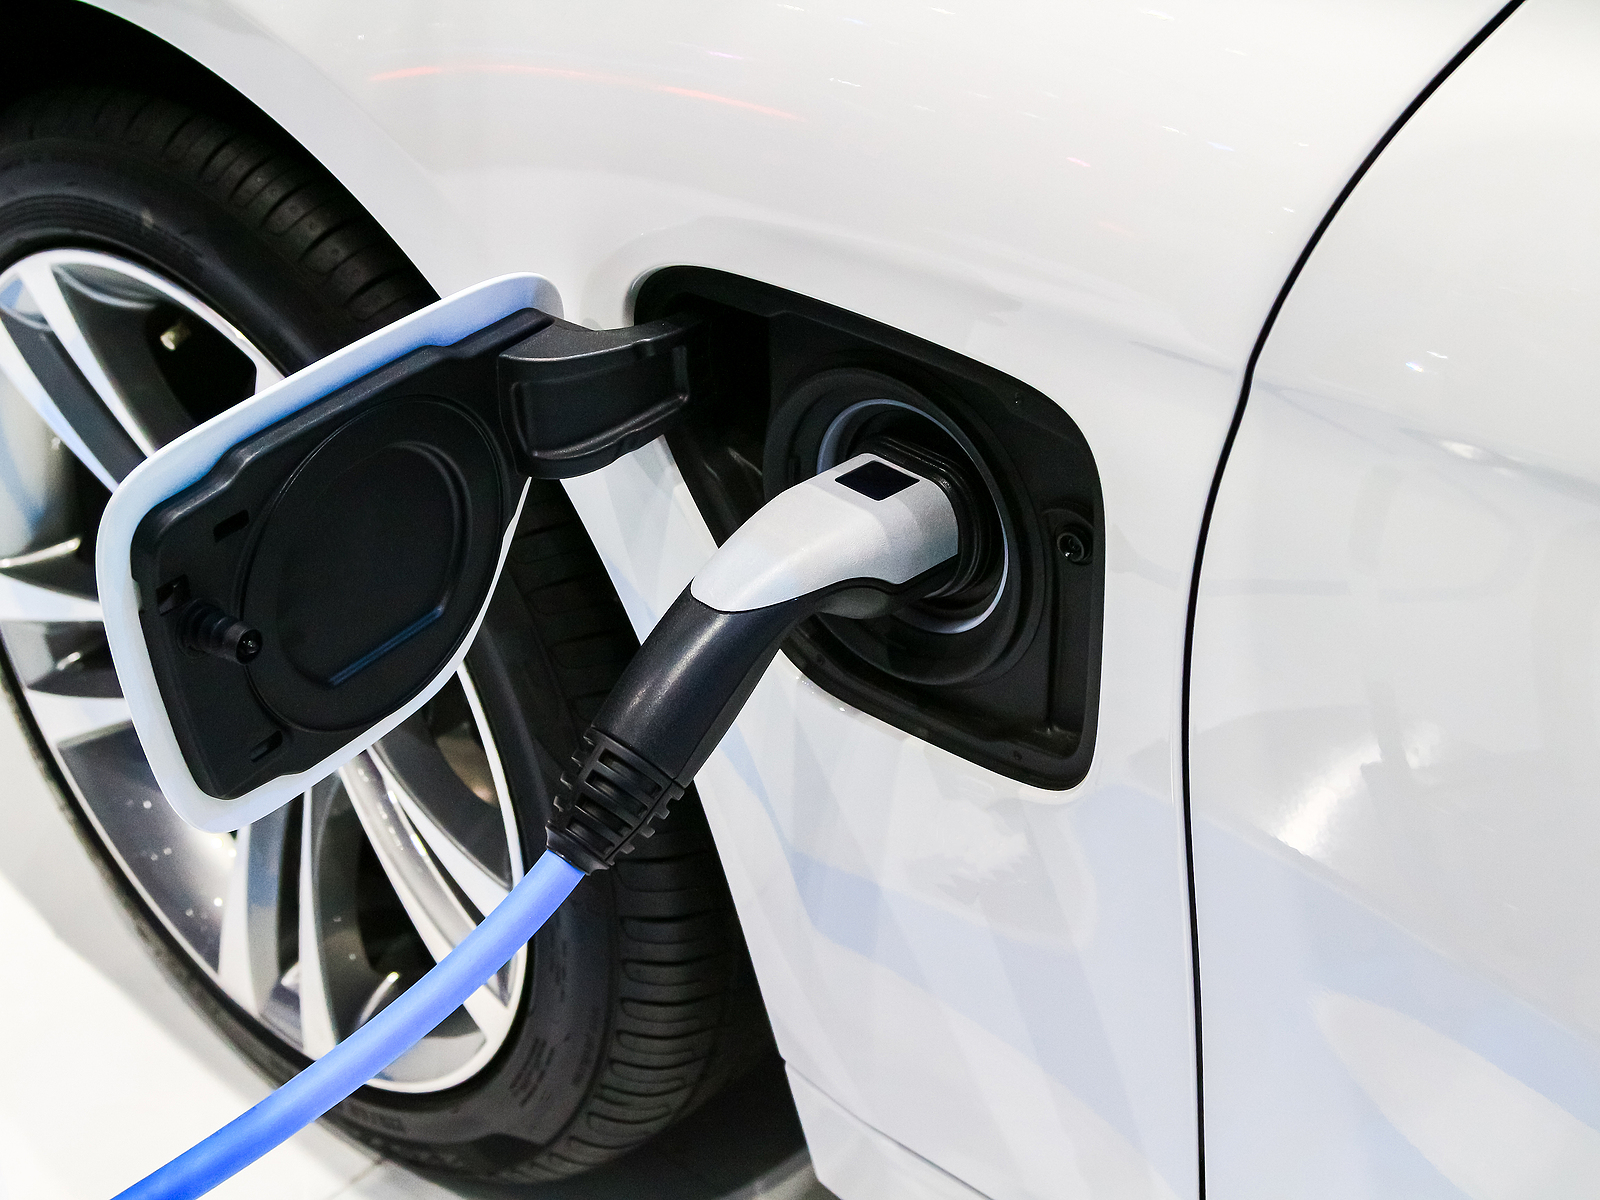 EV Charging course - Power supply plugged for electric car